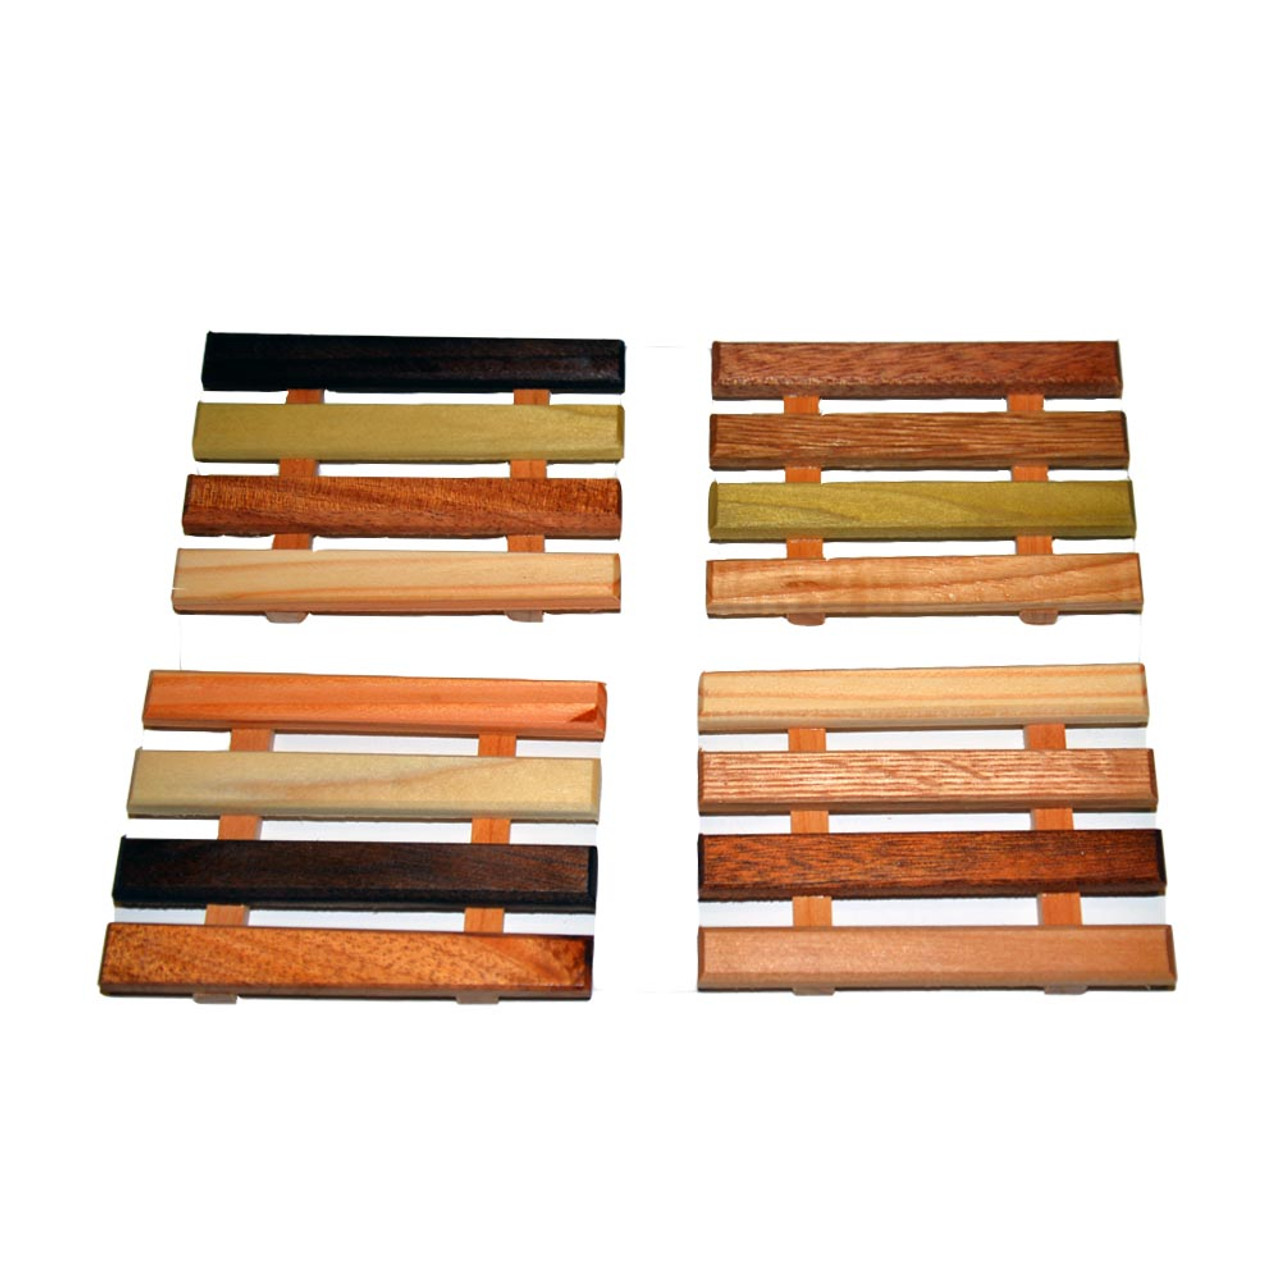 Handcrafted from reclaimed wood made in USA 55 wood soap dishes WHOLESALE LOT 